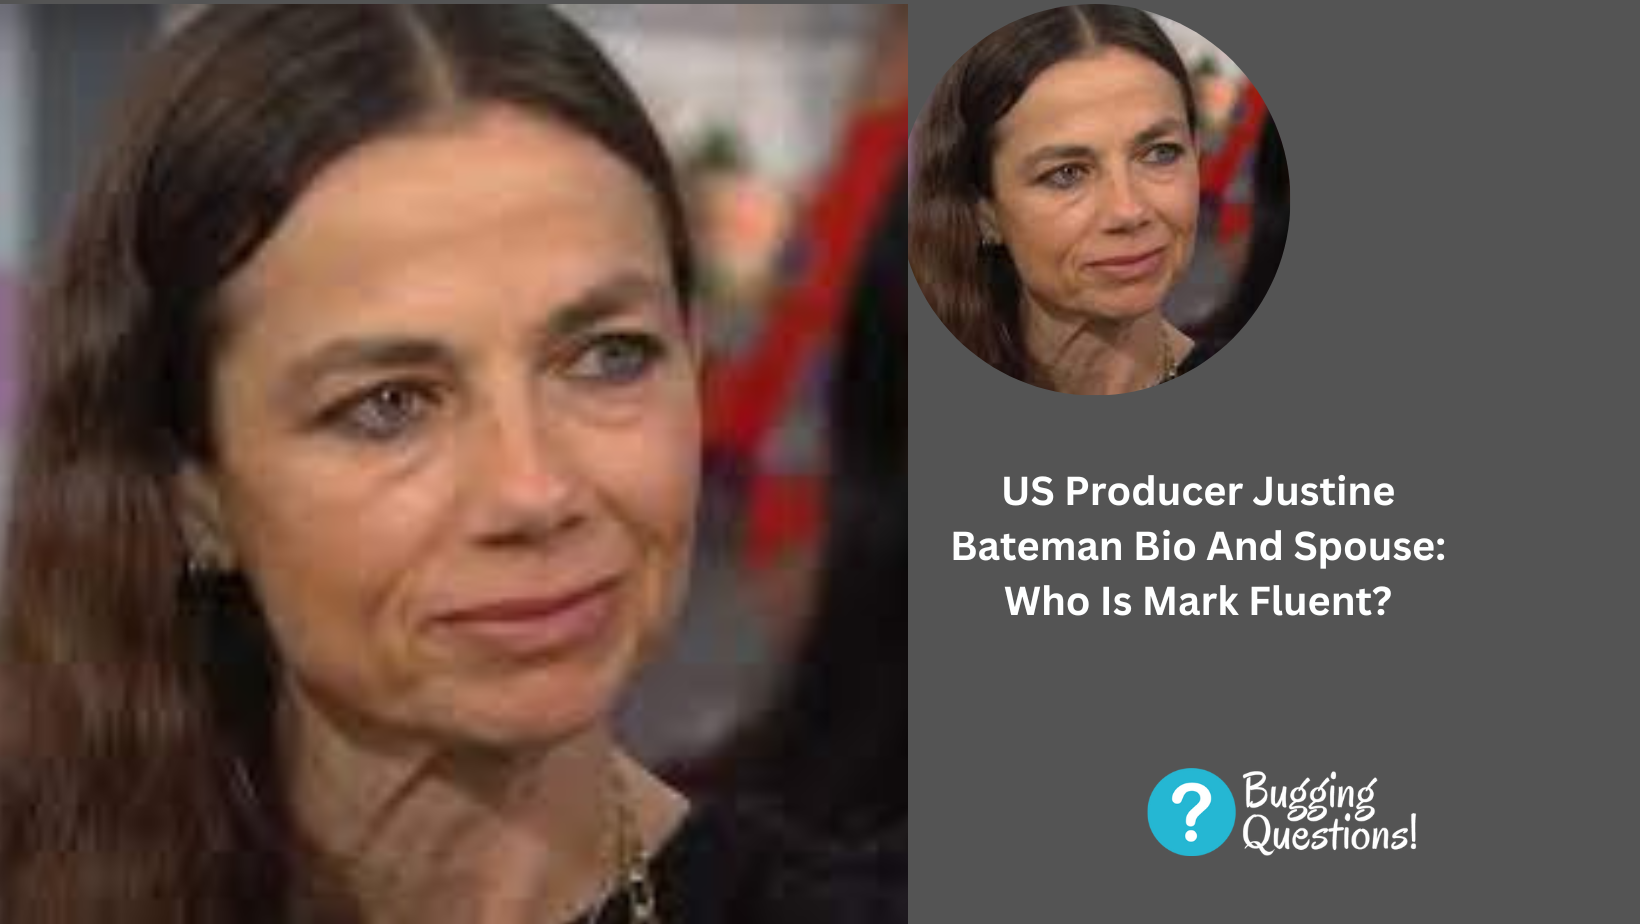 US Producer Justine Bateman Bio And Spouse: Who Is Mark Fluent?